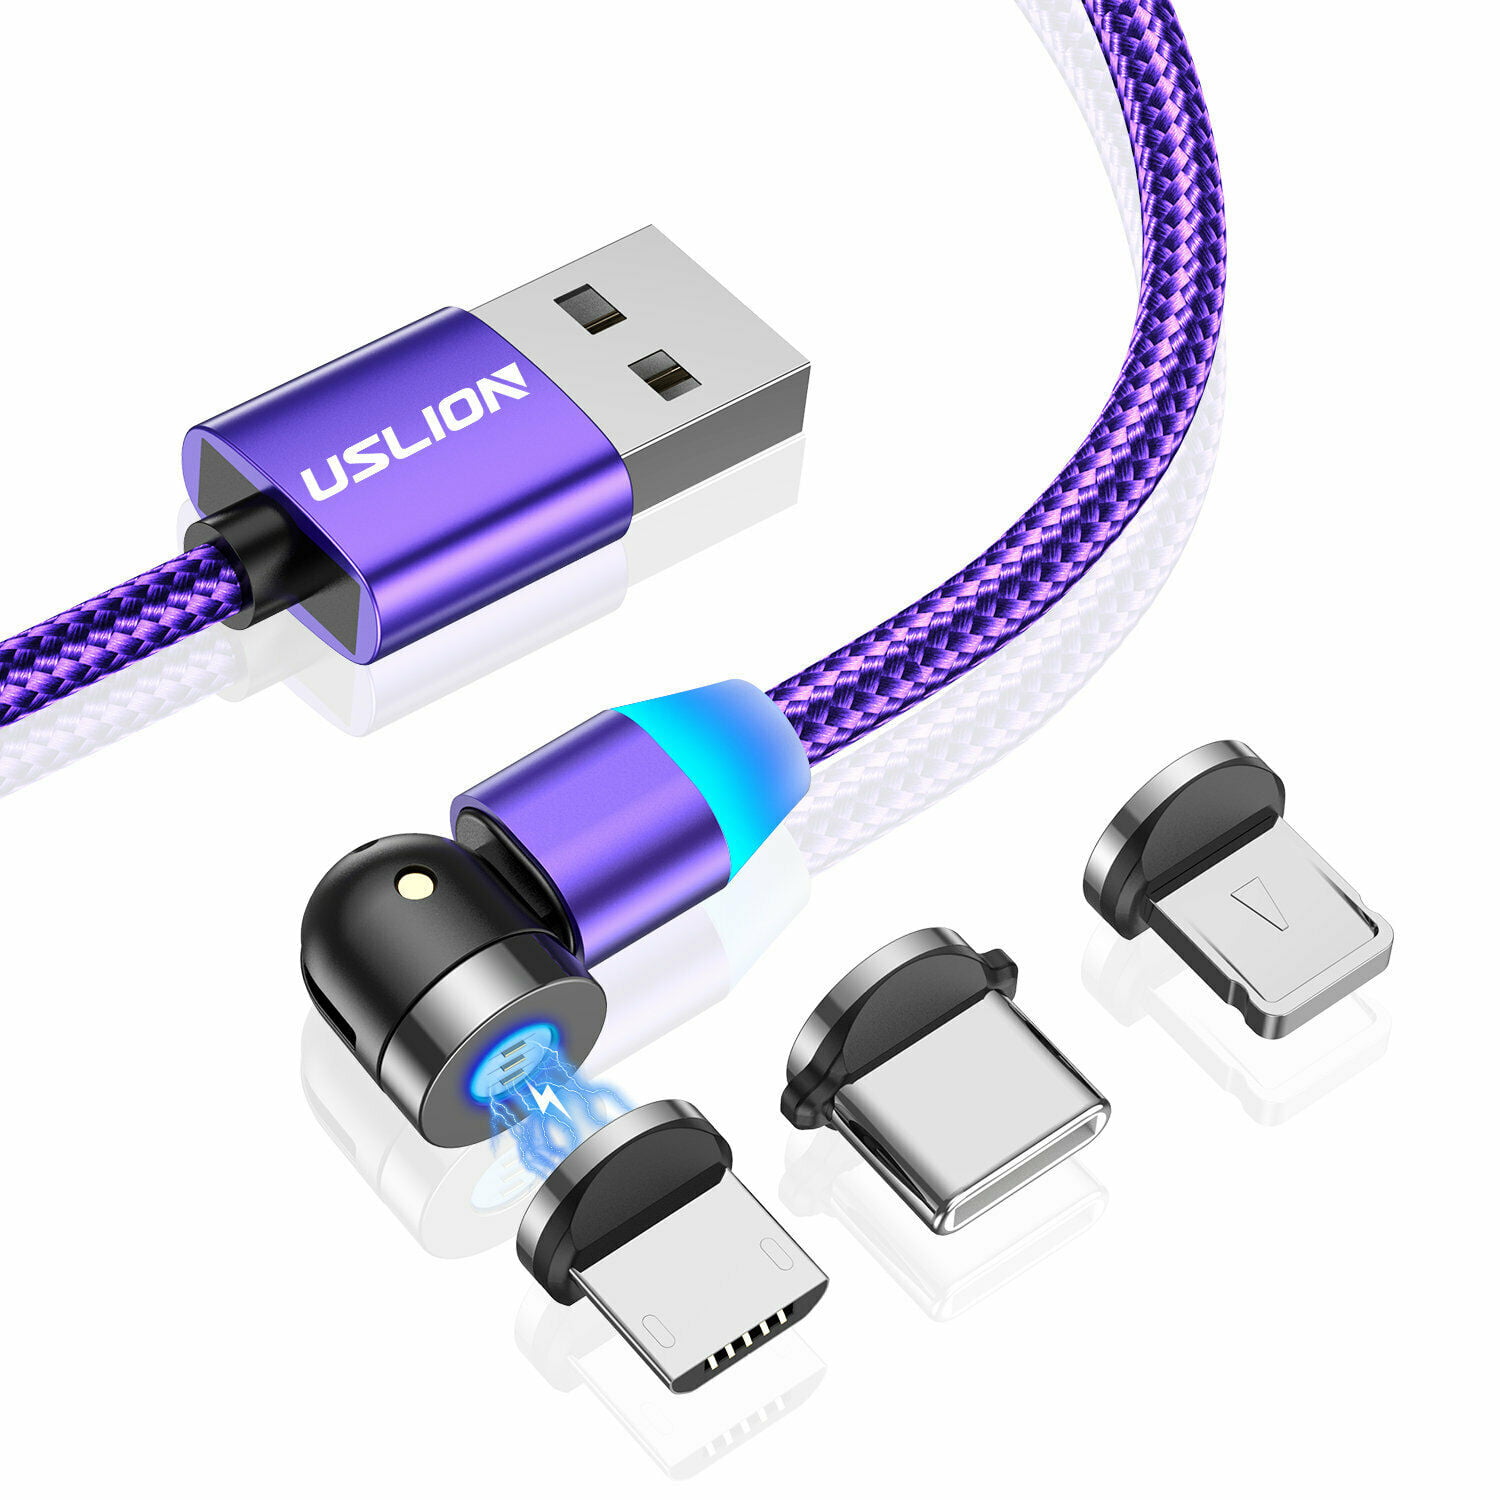 Type-C Universal Interface Three-in-One Data Cable Suitable for All Kinds of Mobile Phones and Tablets Such As Apple Android Trump 2020 USB Cable High Speed Data and Charging